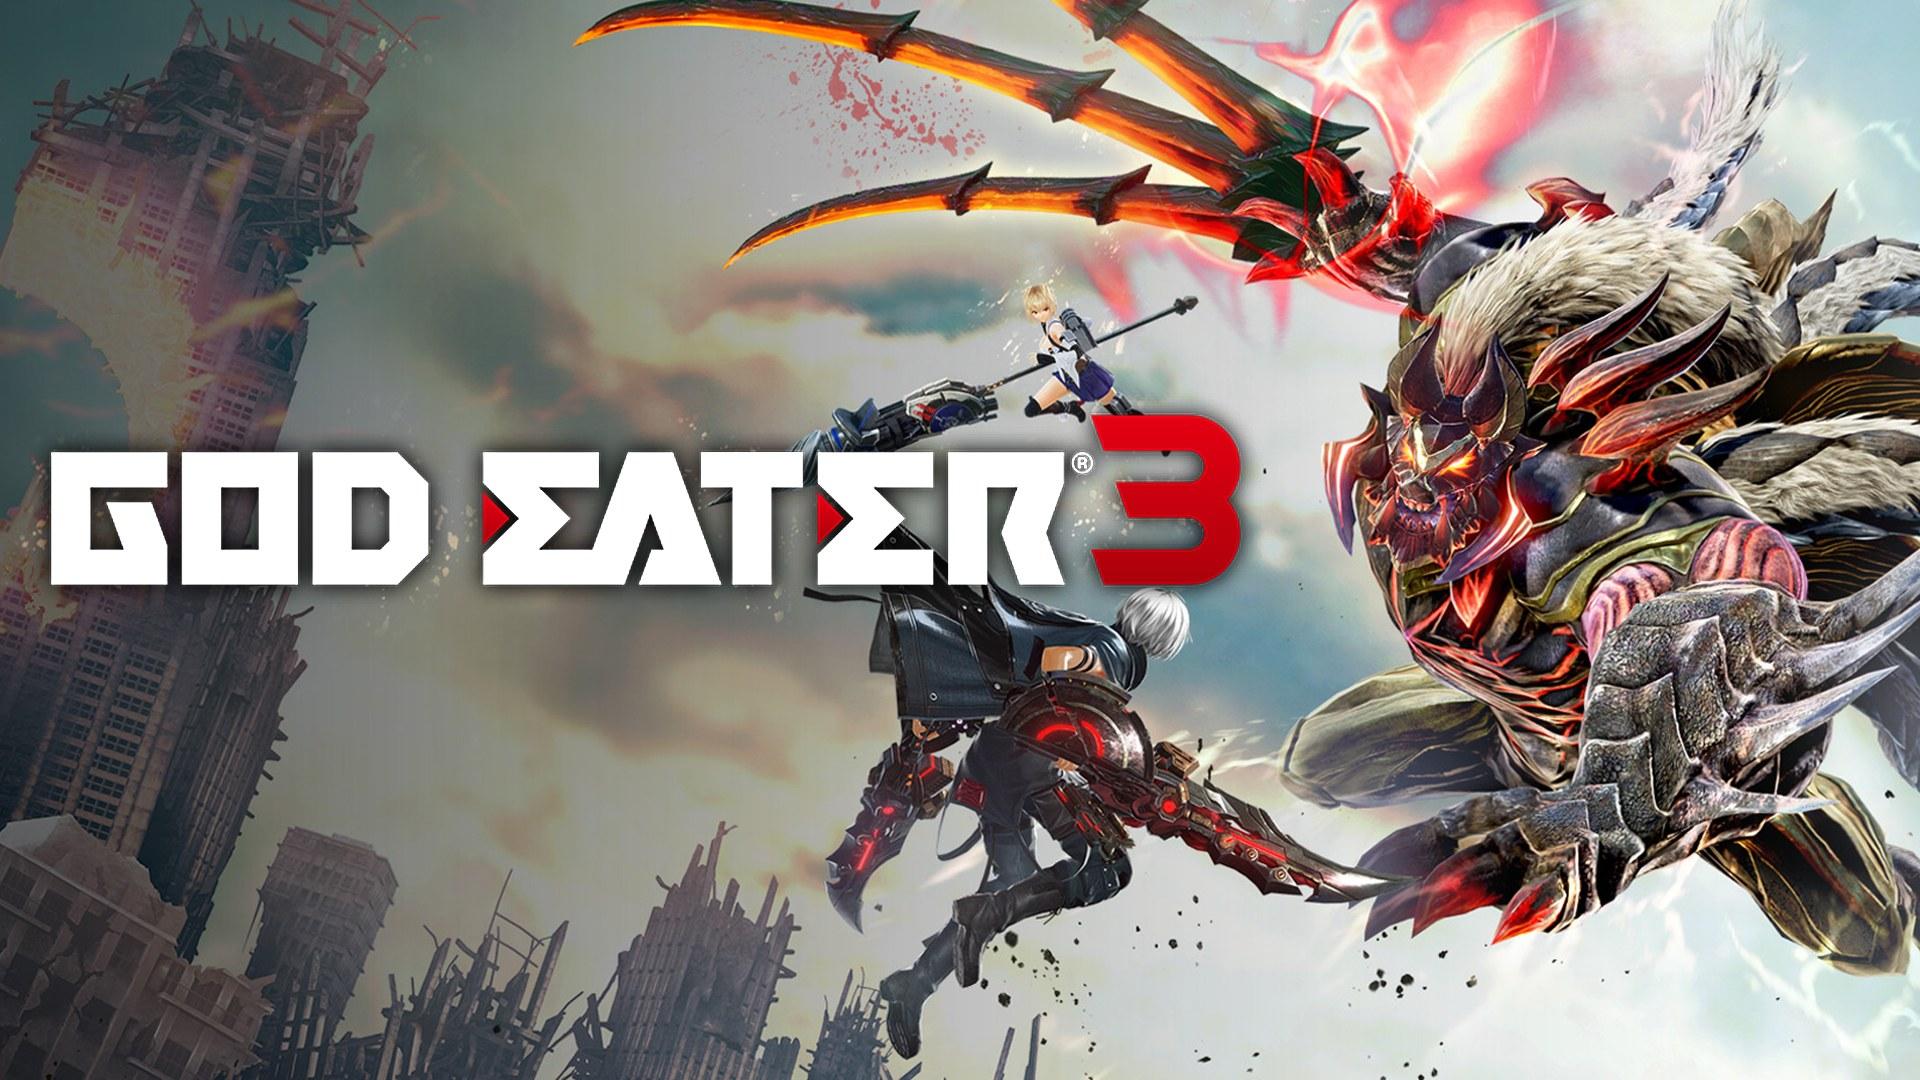 God Eater 3 Launches Today on Nintendo Switch With Explosive New Trailer